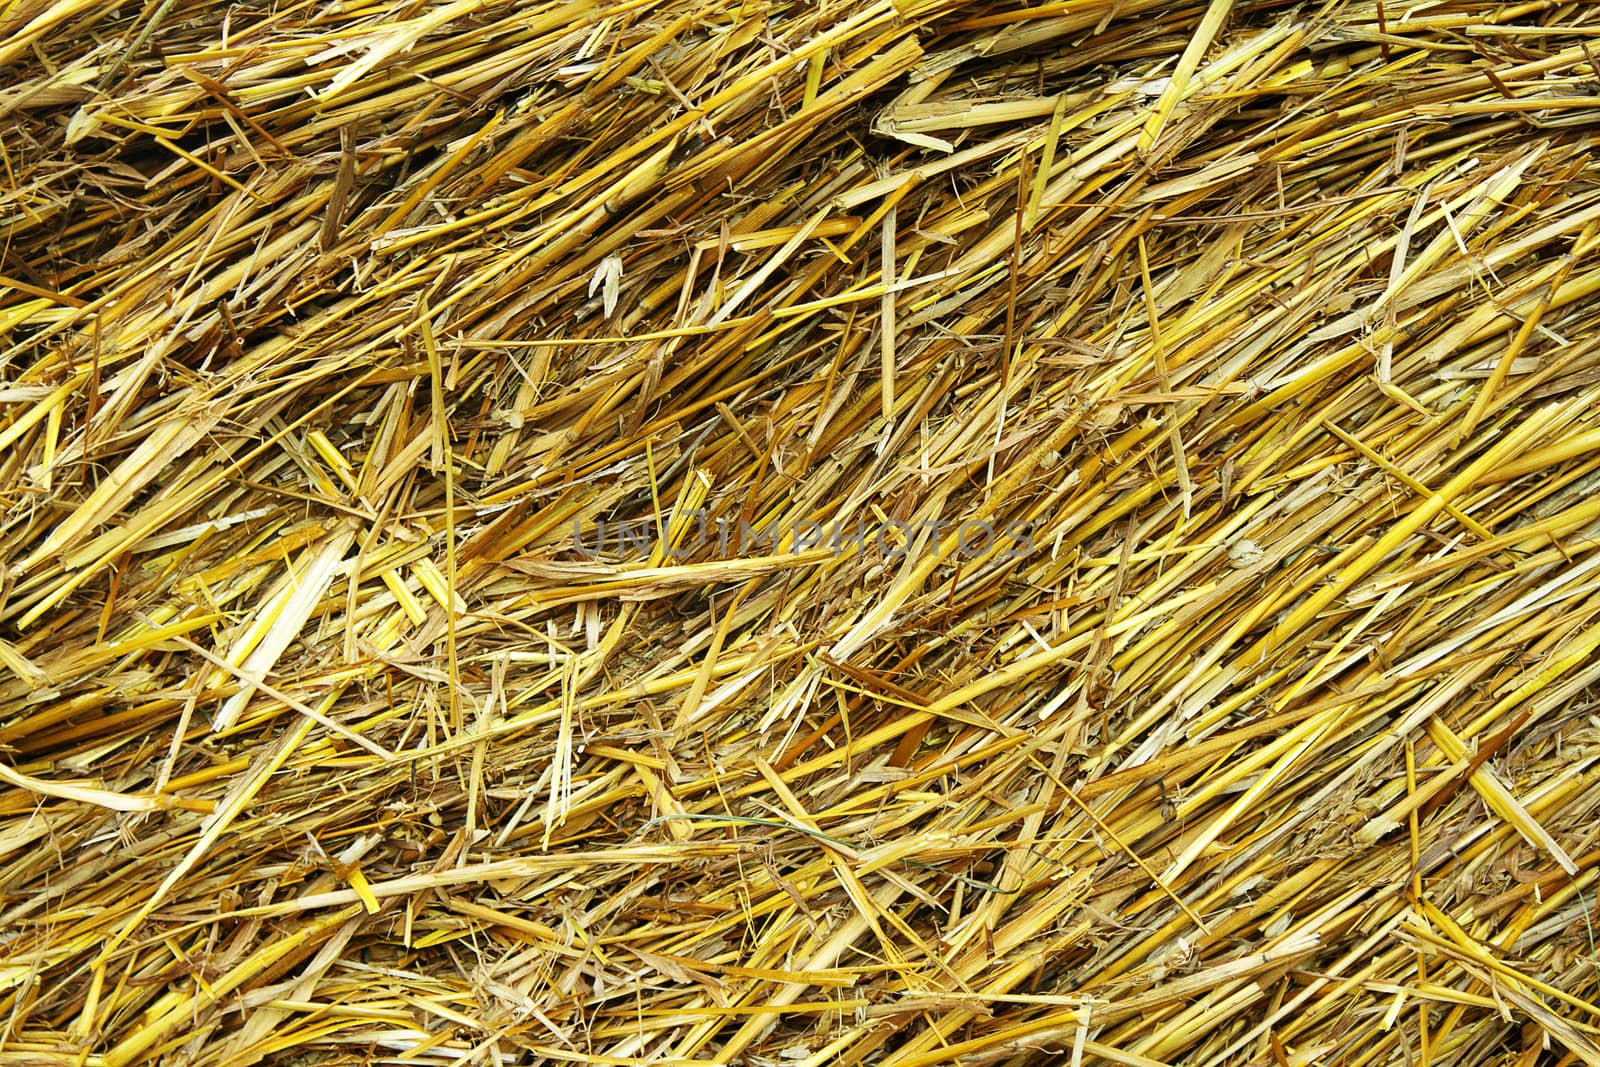 A close up photo of straw